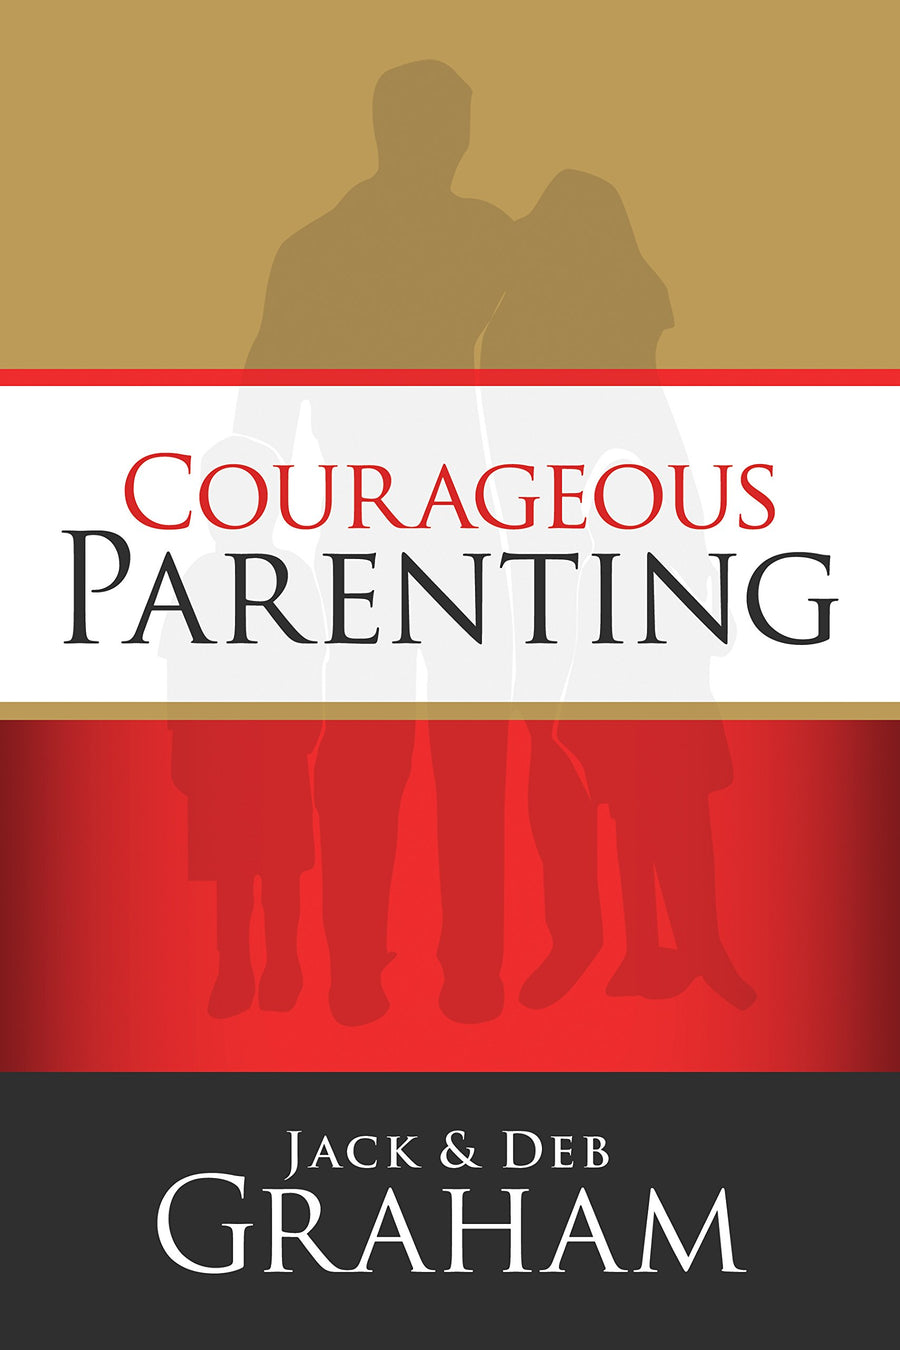 Courageous Parenting by Jack & Deb Graham